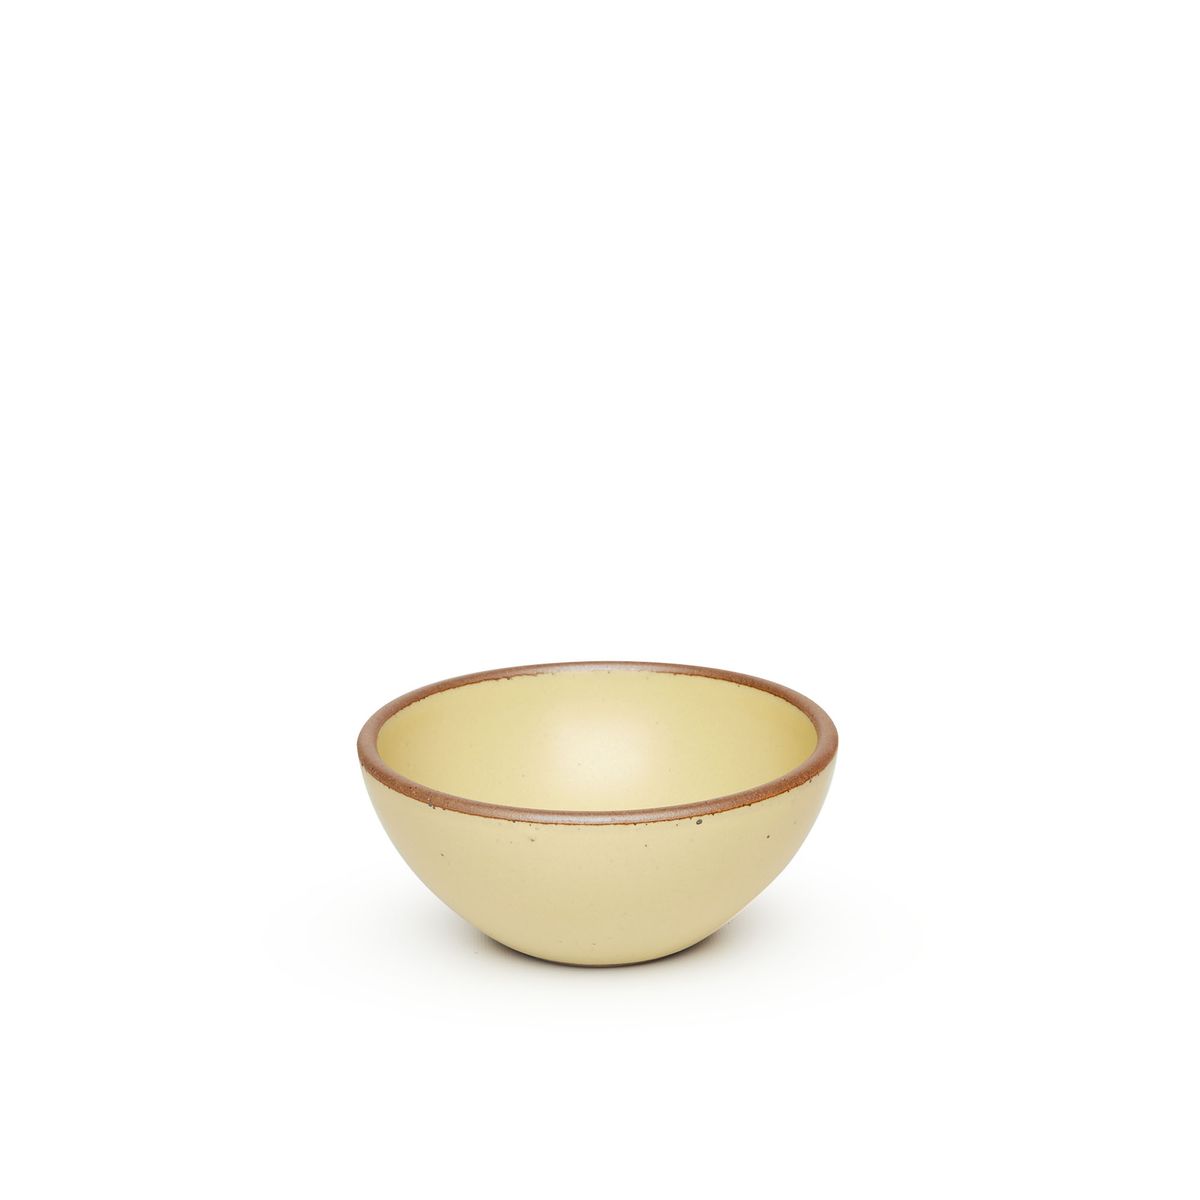 A small dessert sized rounded ceramic bowl in a light butter yellow color featuring iron speckles and an unglazed rim